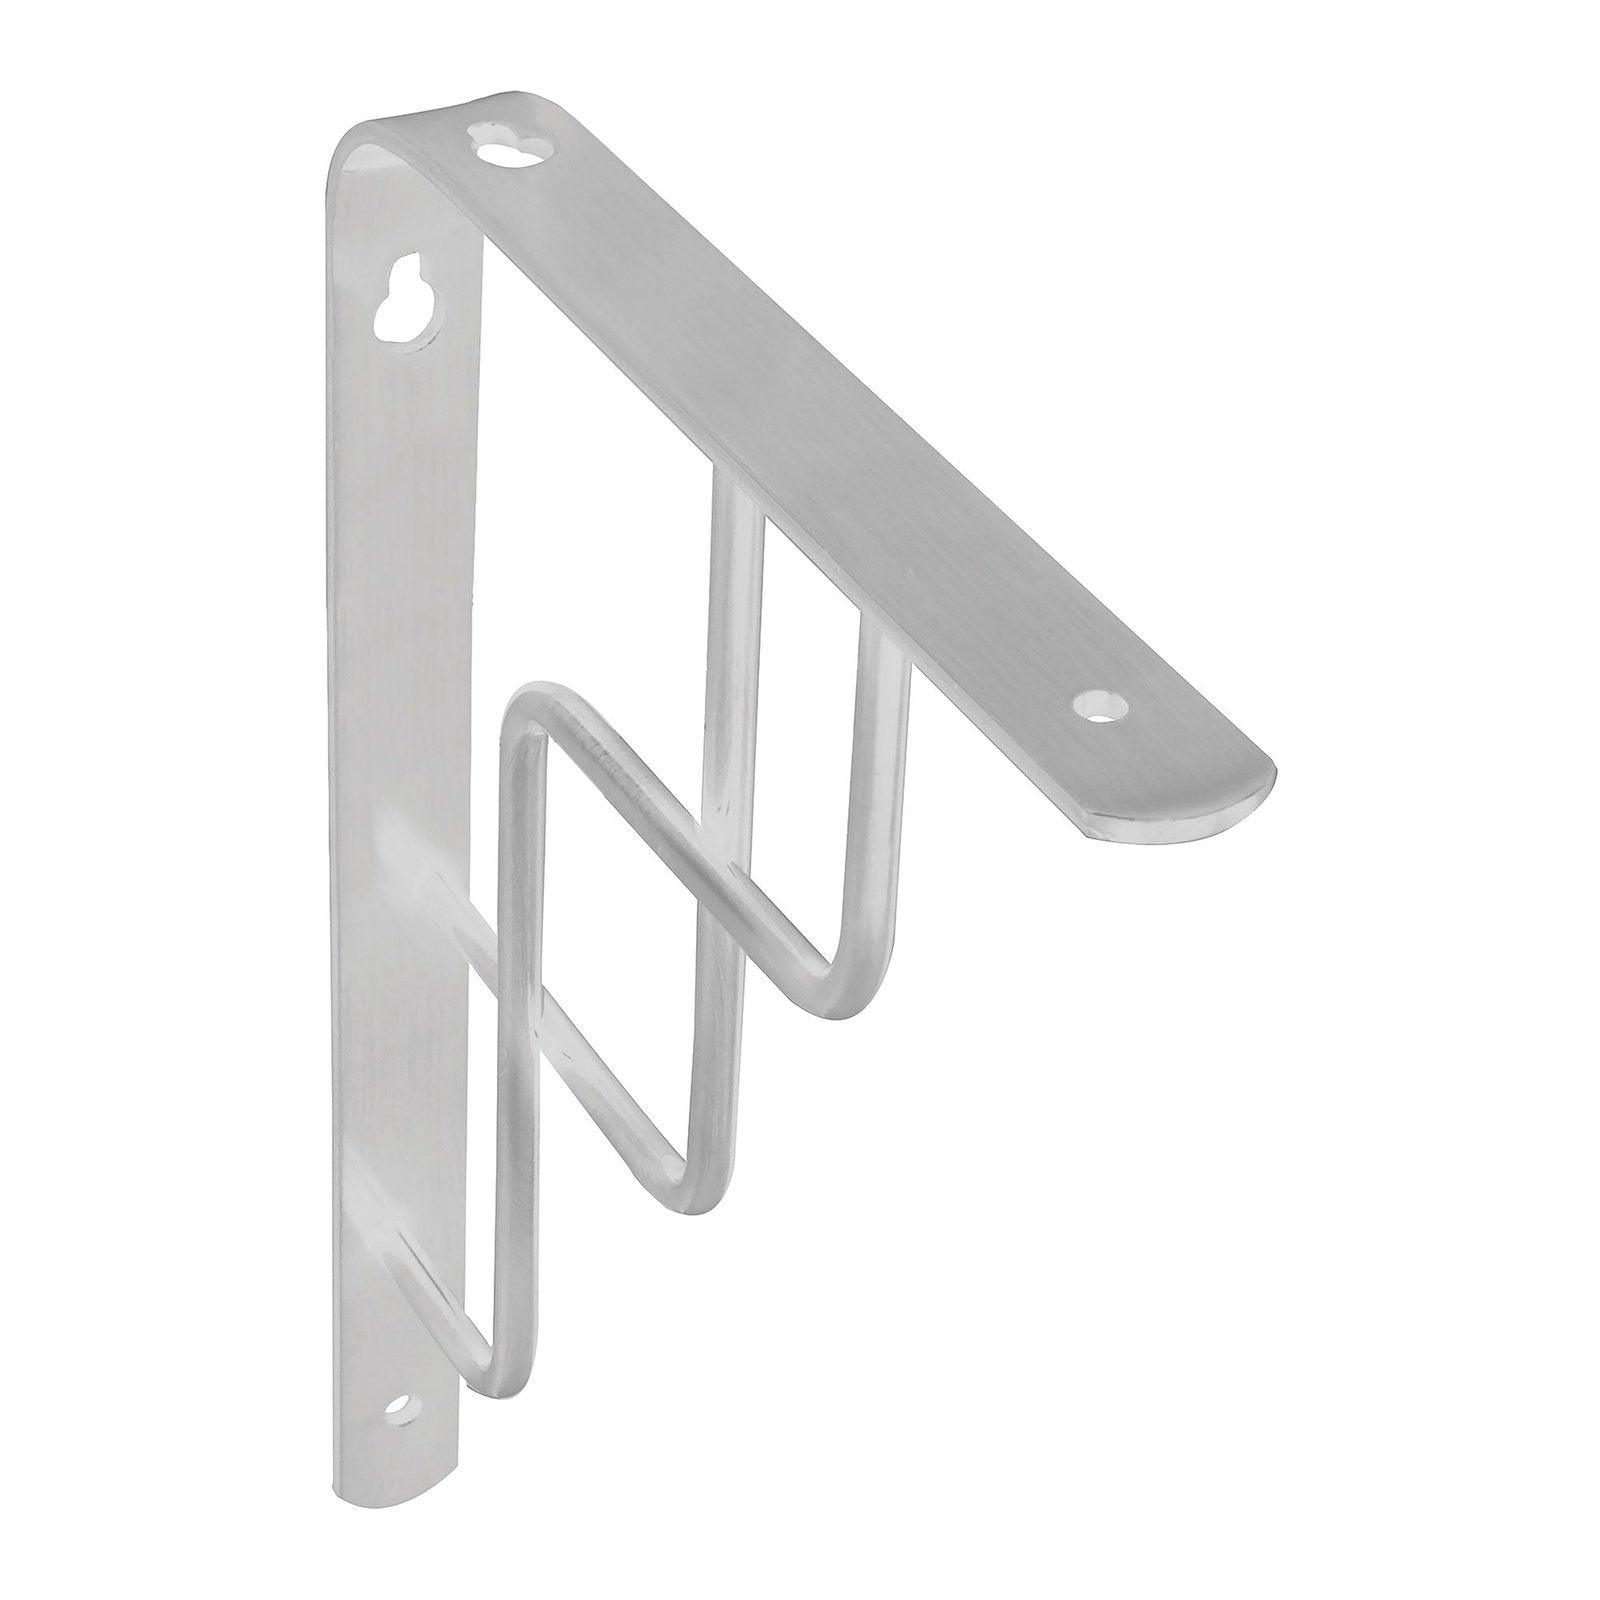 Step Shelf Bracket - 4 Pack - Office Products Online